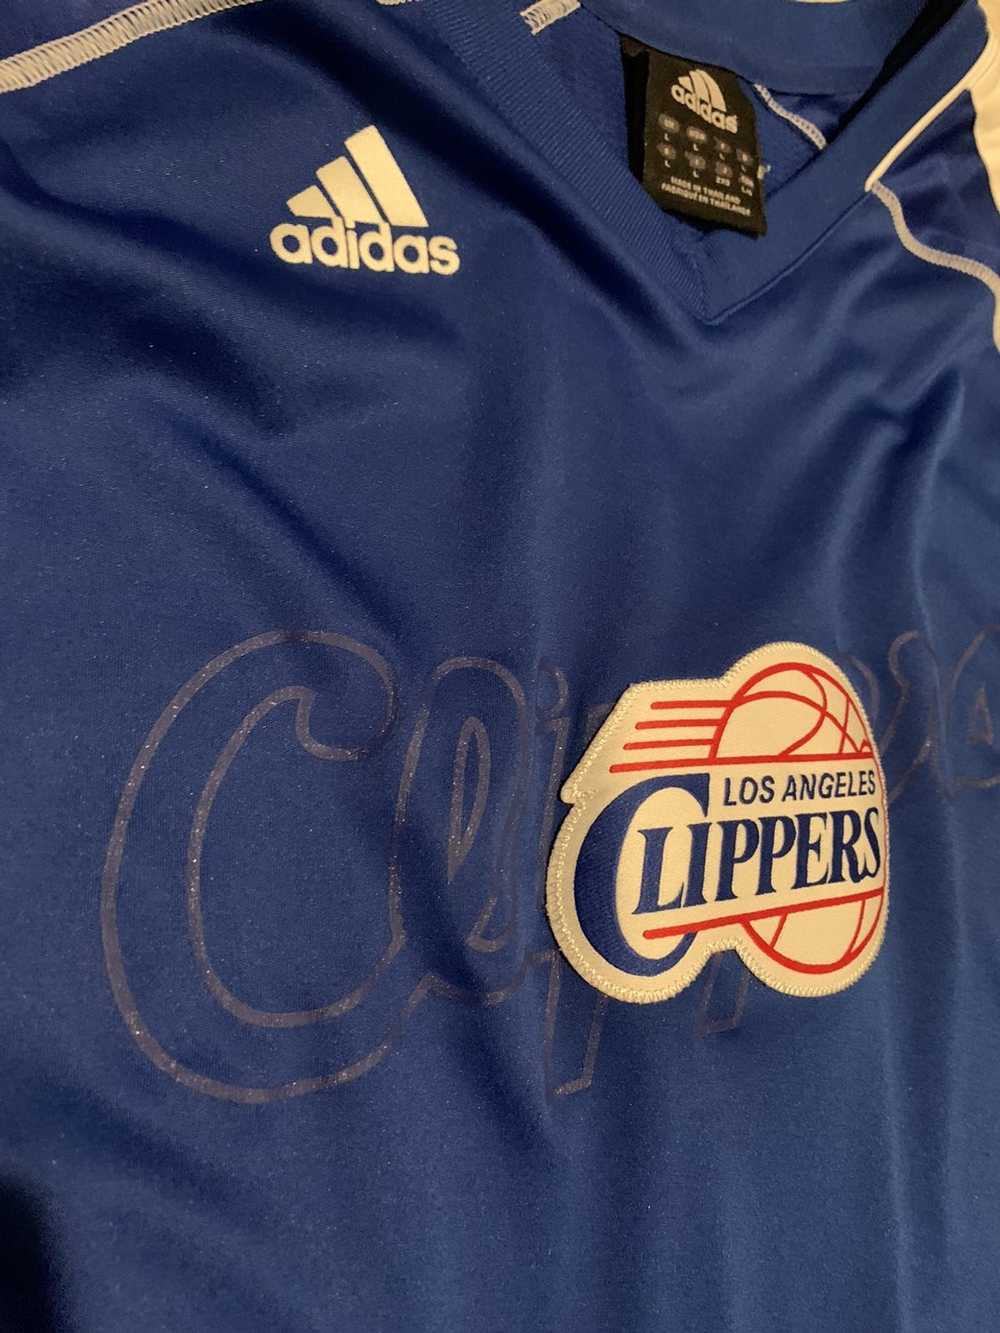 Adidas Adidas Los Angeles Clippers - image 5